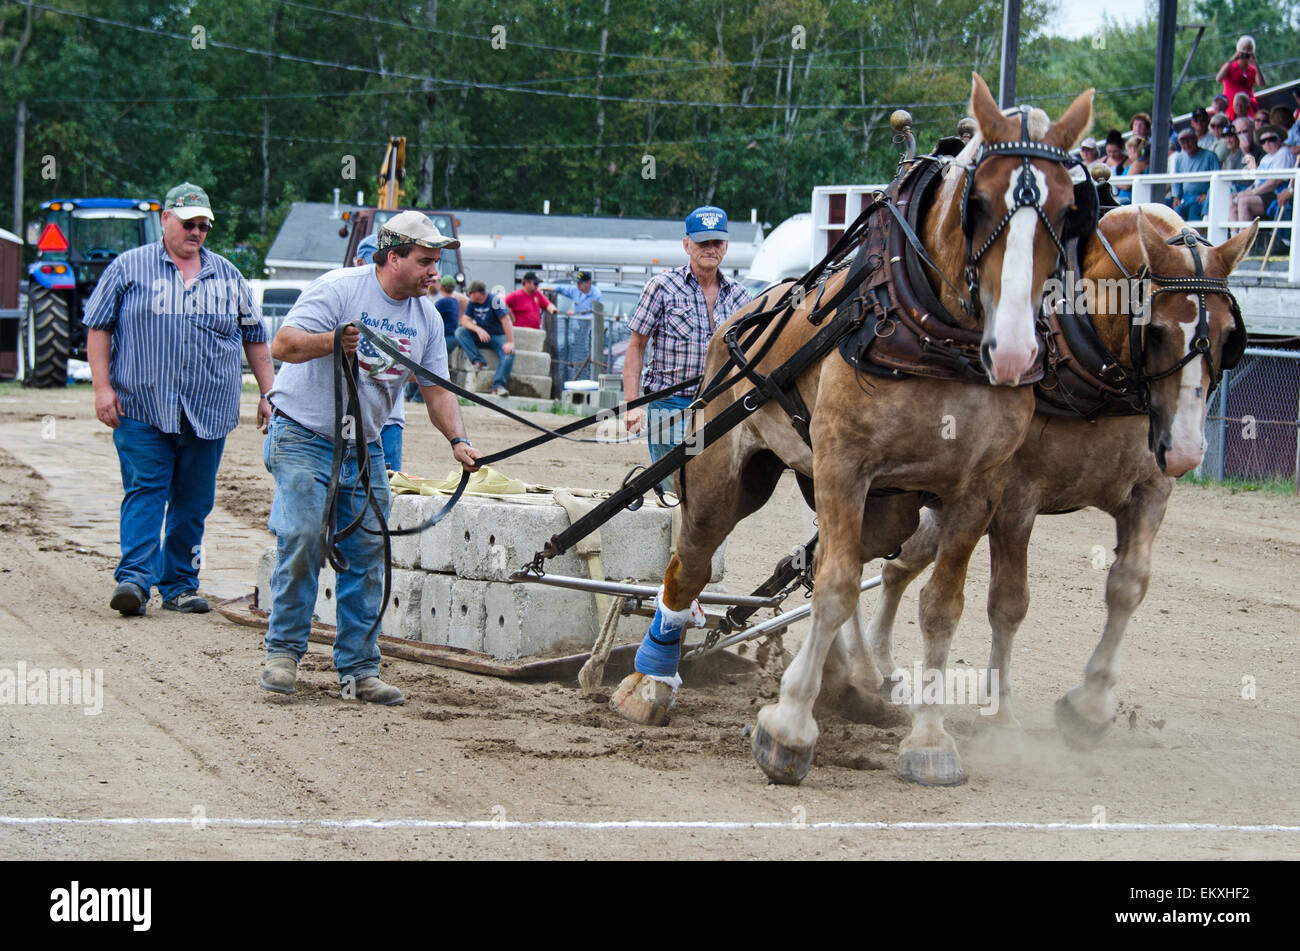 A competitor urges his horses on during the draft horse load-pulling competition at the Blue Hill Fair, Maine. Stock Photo